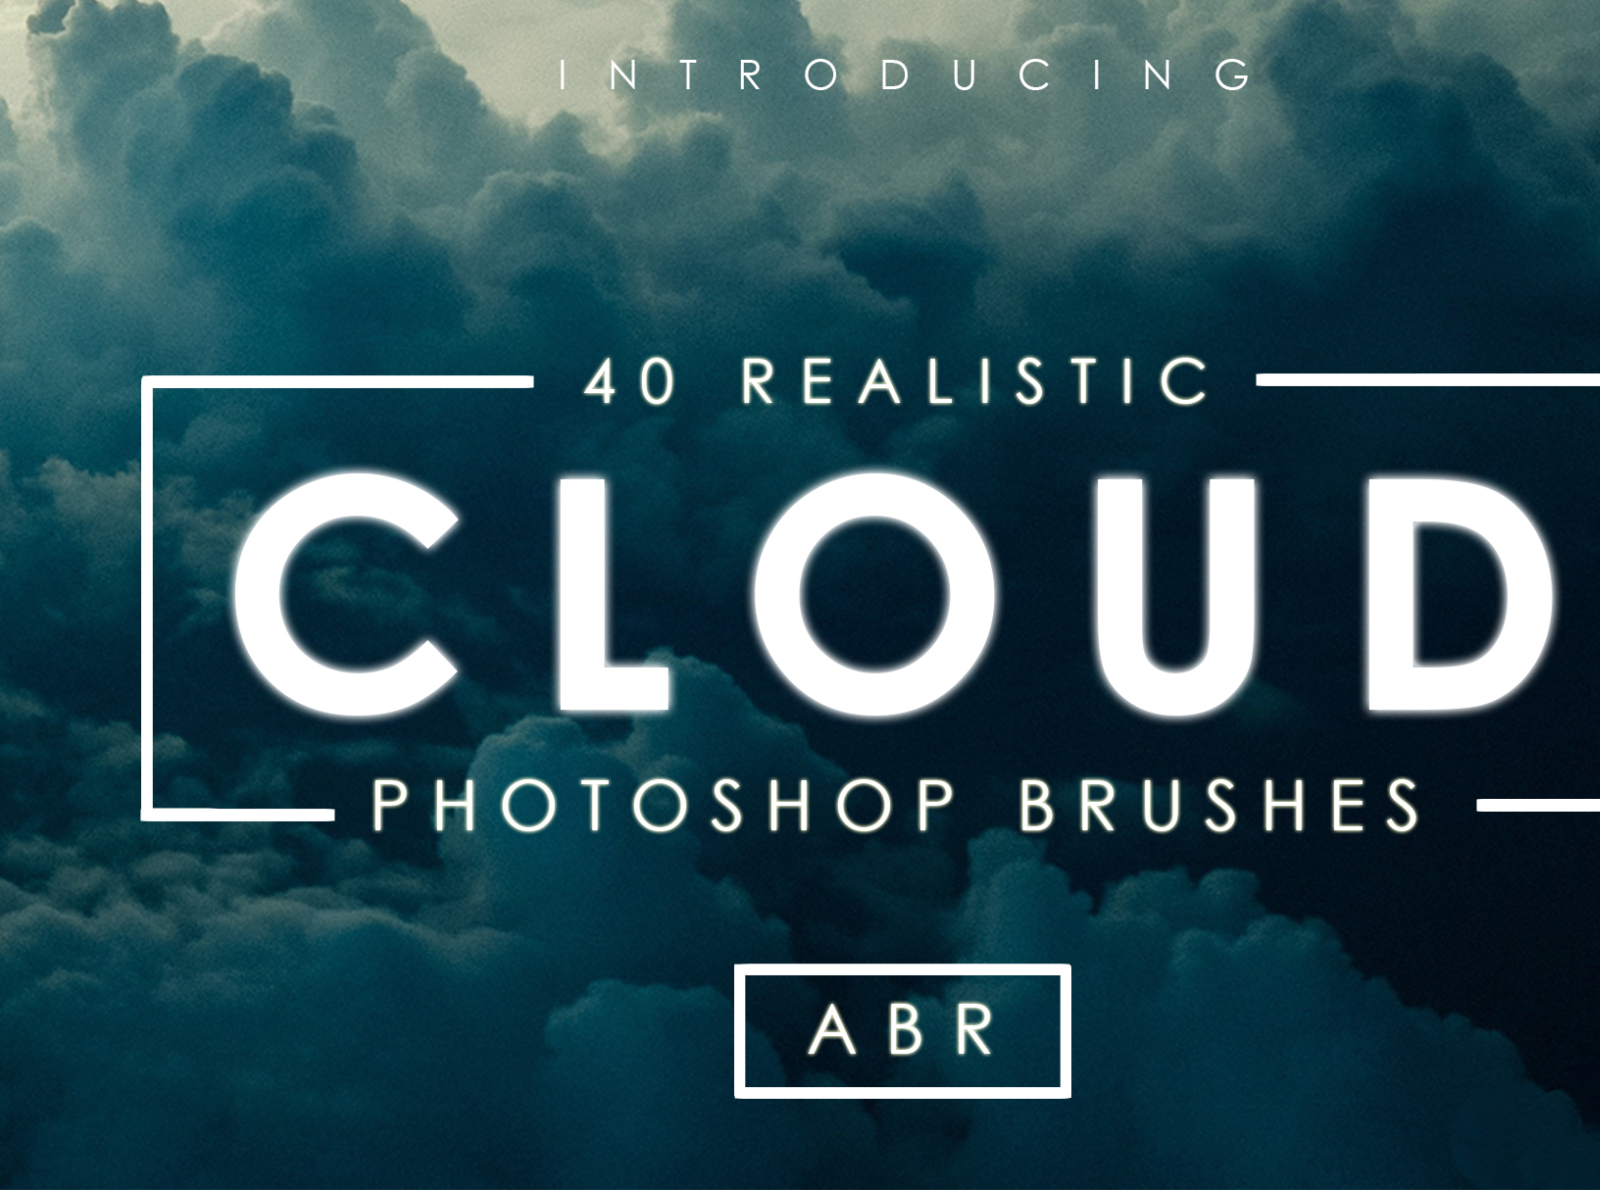 photoshop cloud brushes for mac